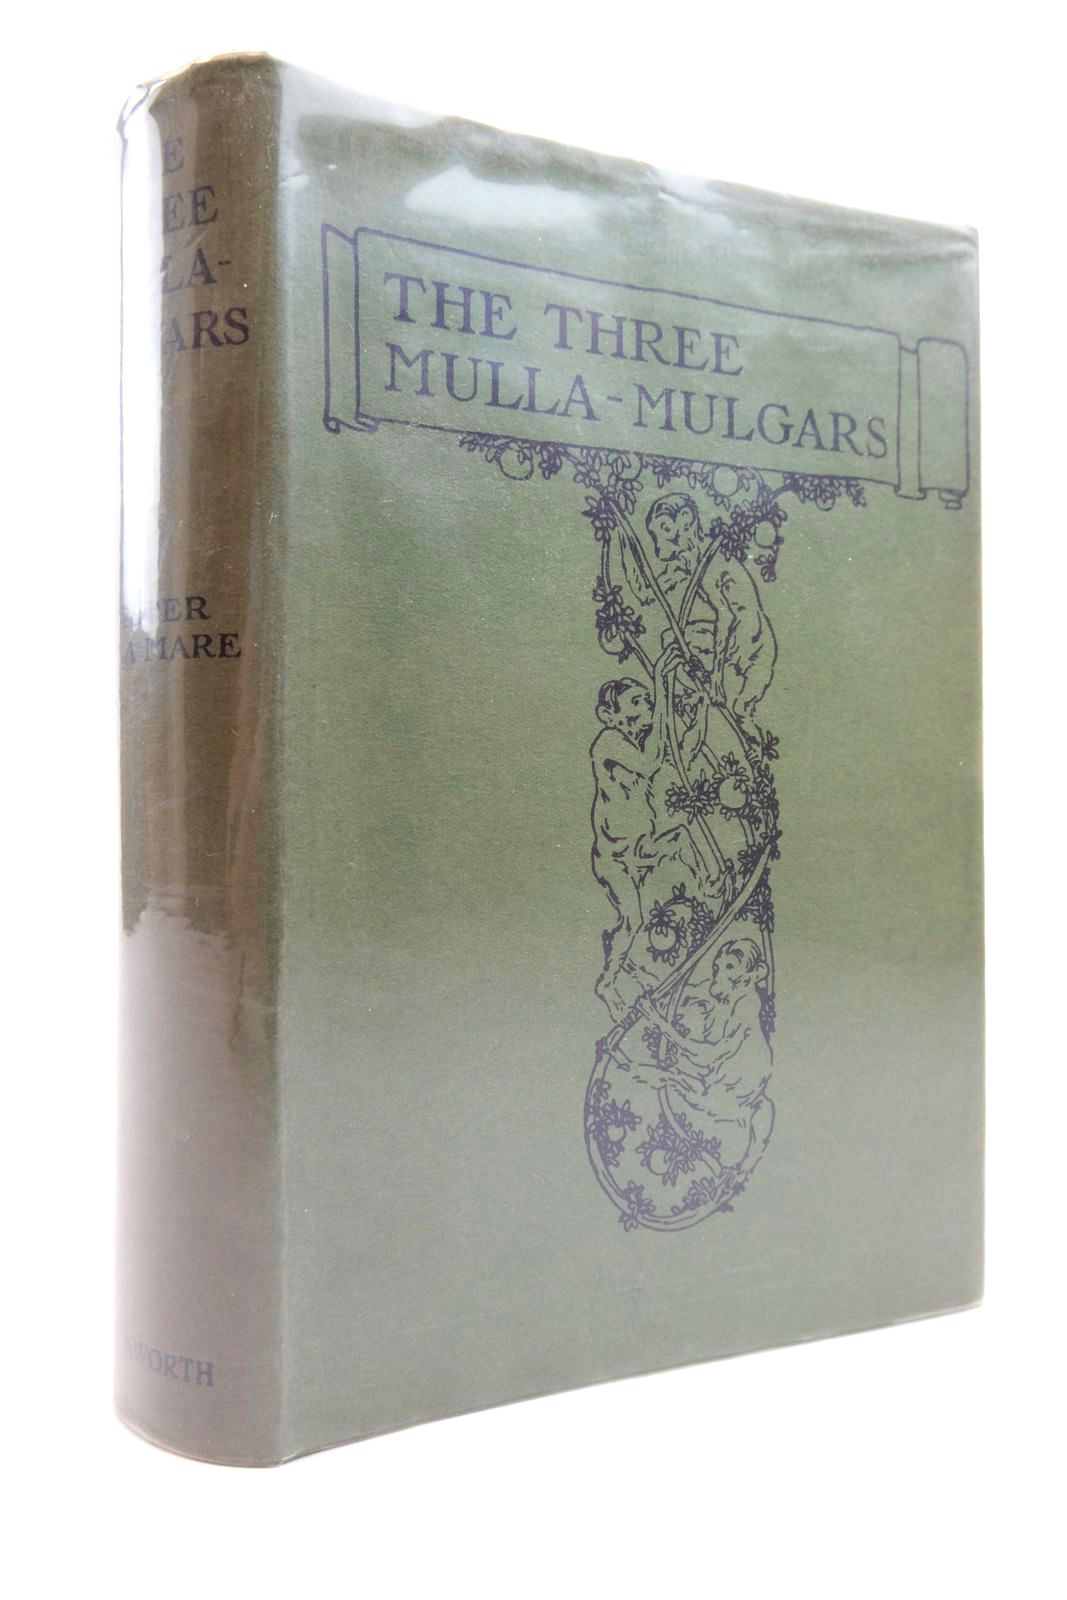 Photo of THE THREE MULLA-MULGARS written by De La Mare, Walter illustrated by Monsell, J.R. published by Duckworth &amp; Co. (STOCK CODE: 2140069)  for sale by Stella & Rose's Books